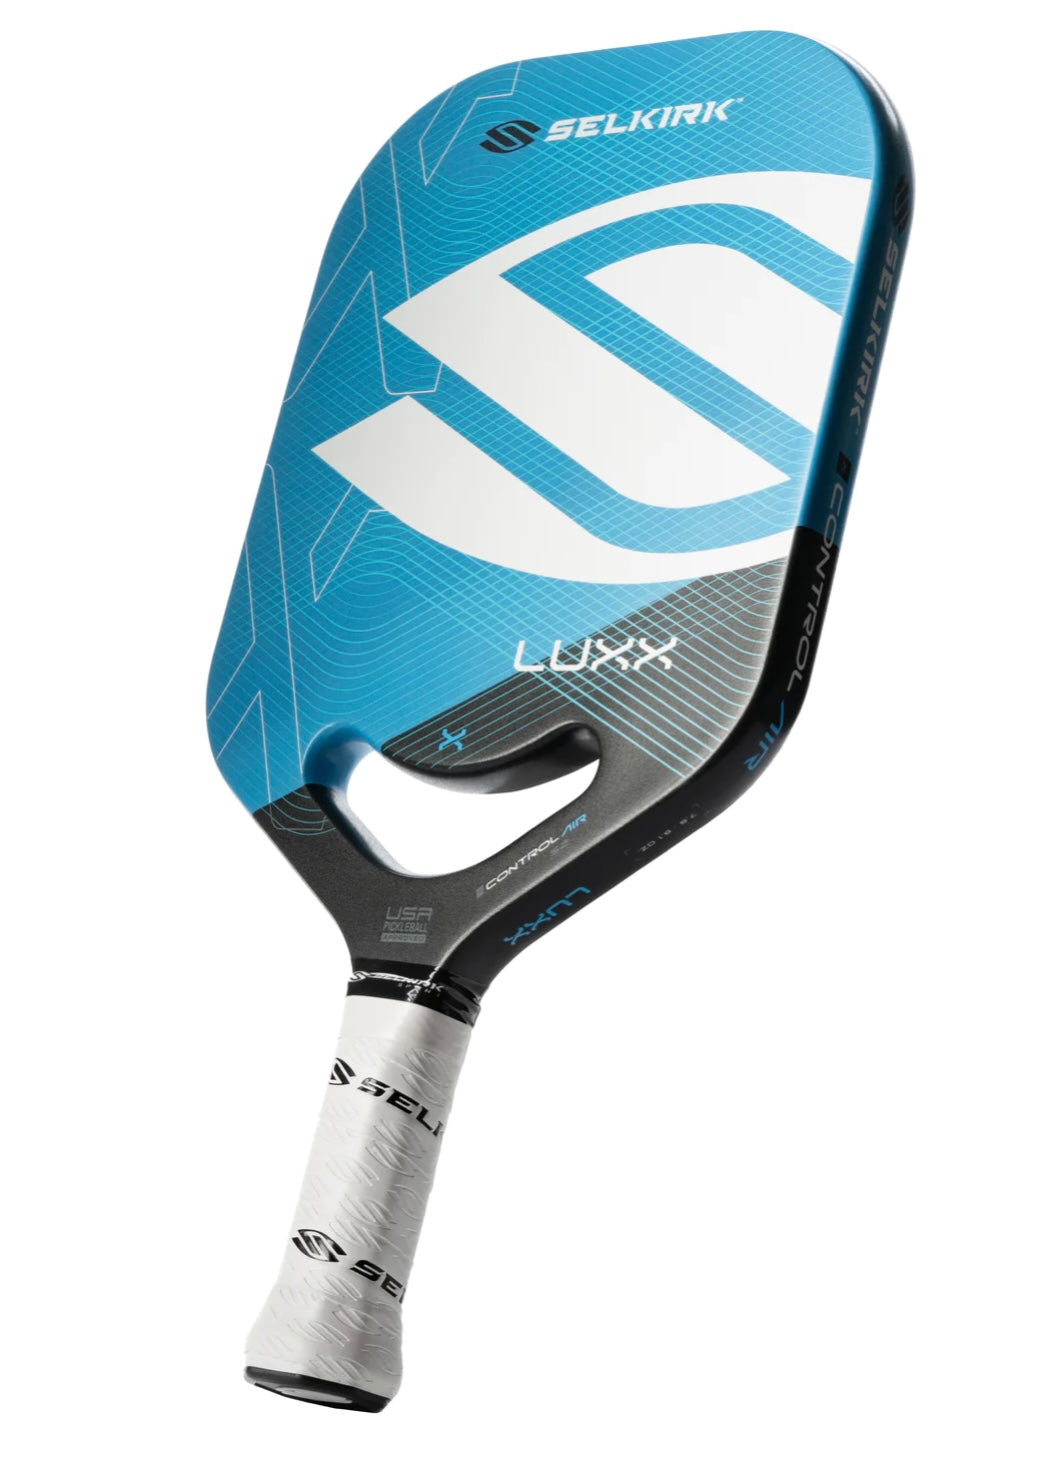 Selkirk LUXX Control Air S2 Blue